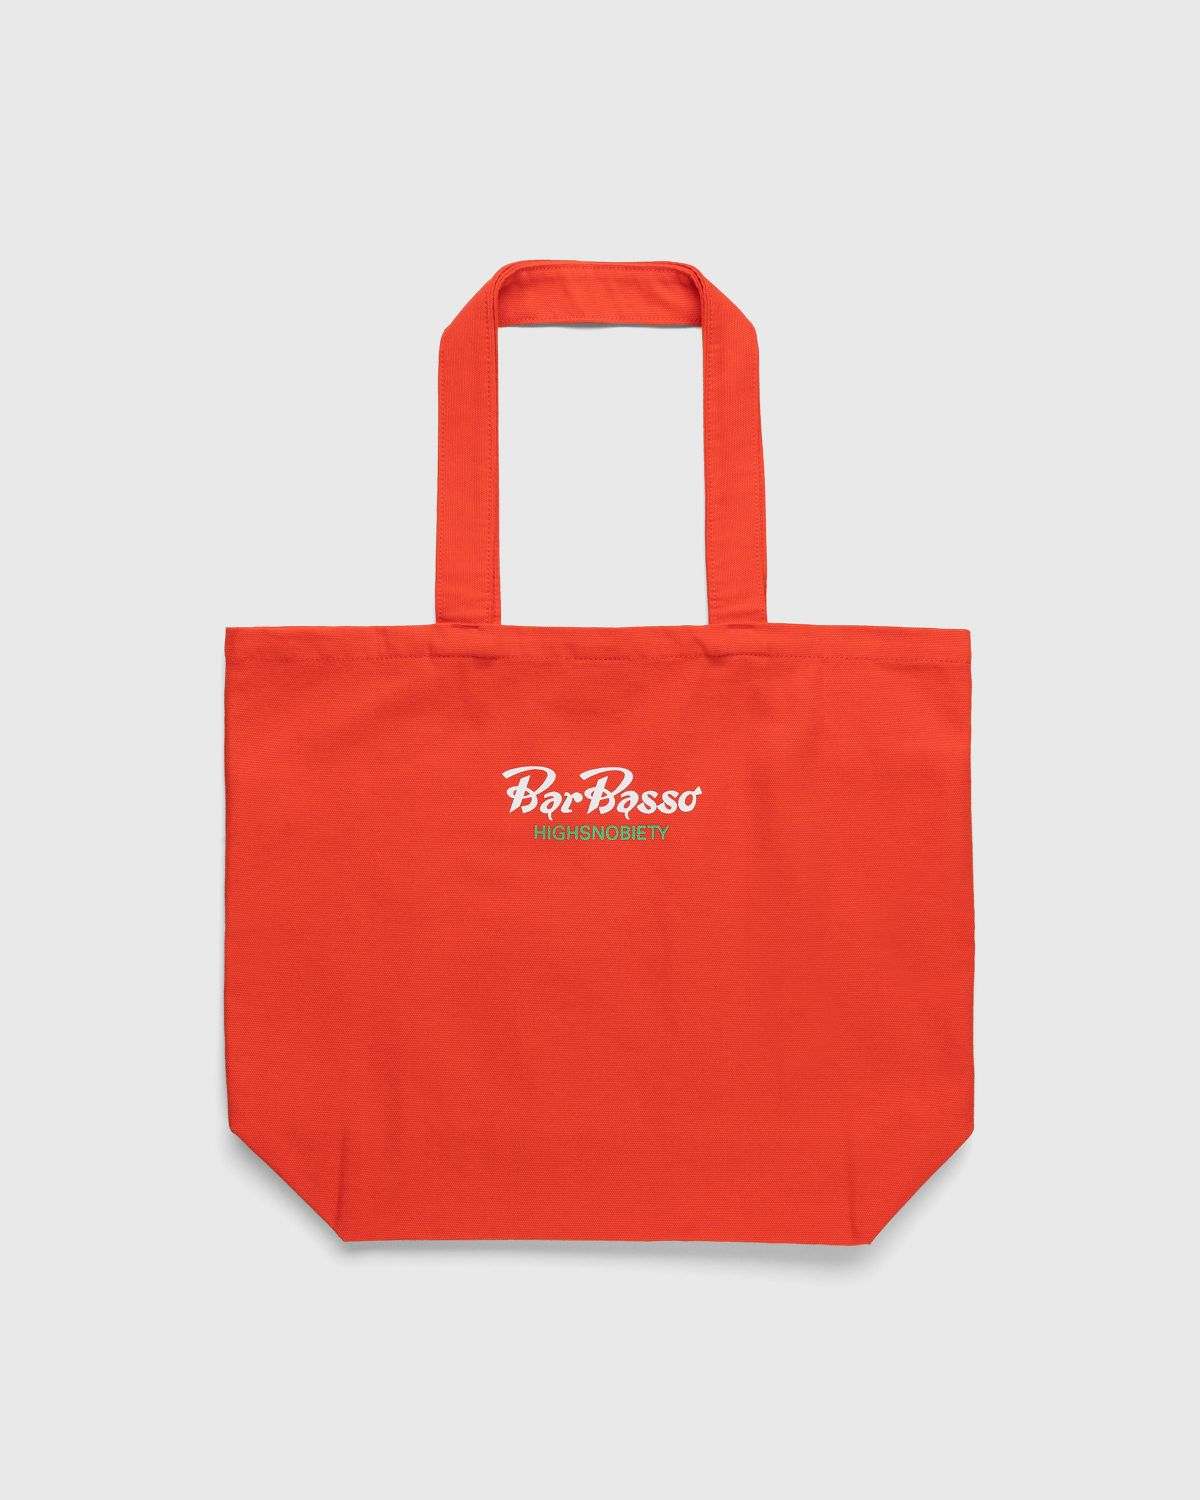 Bar Basso x Highsnobiety – Sbagliato Tote Bag Red - Bags - Red - Image 2